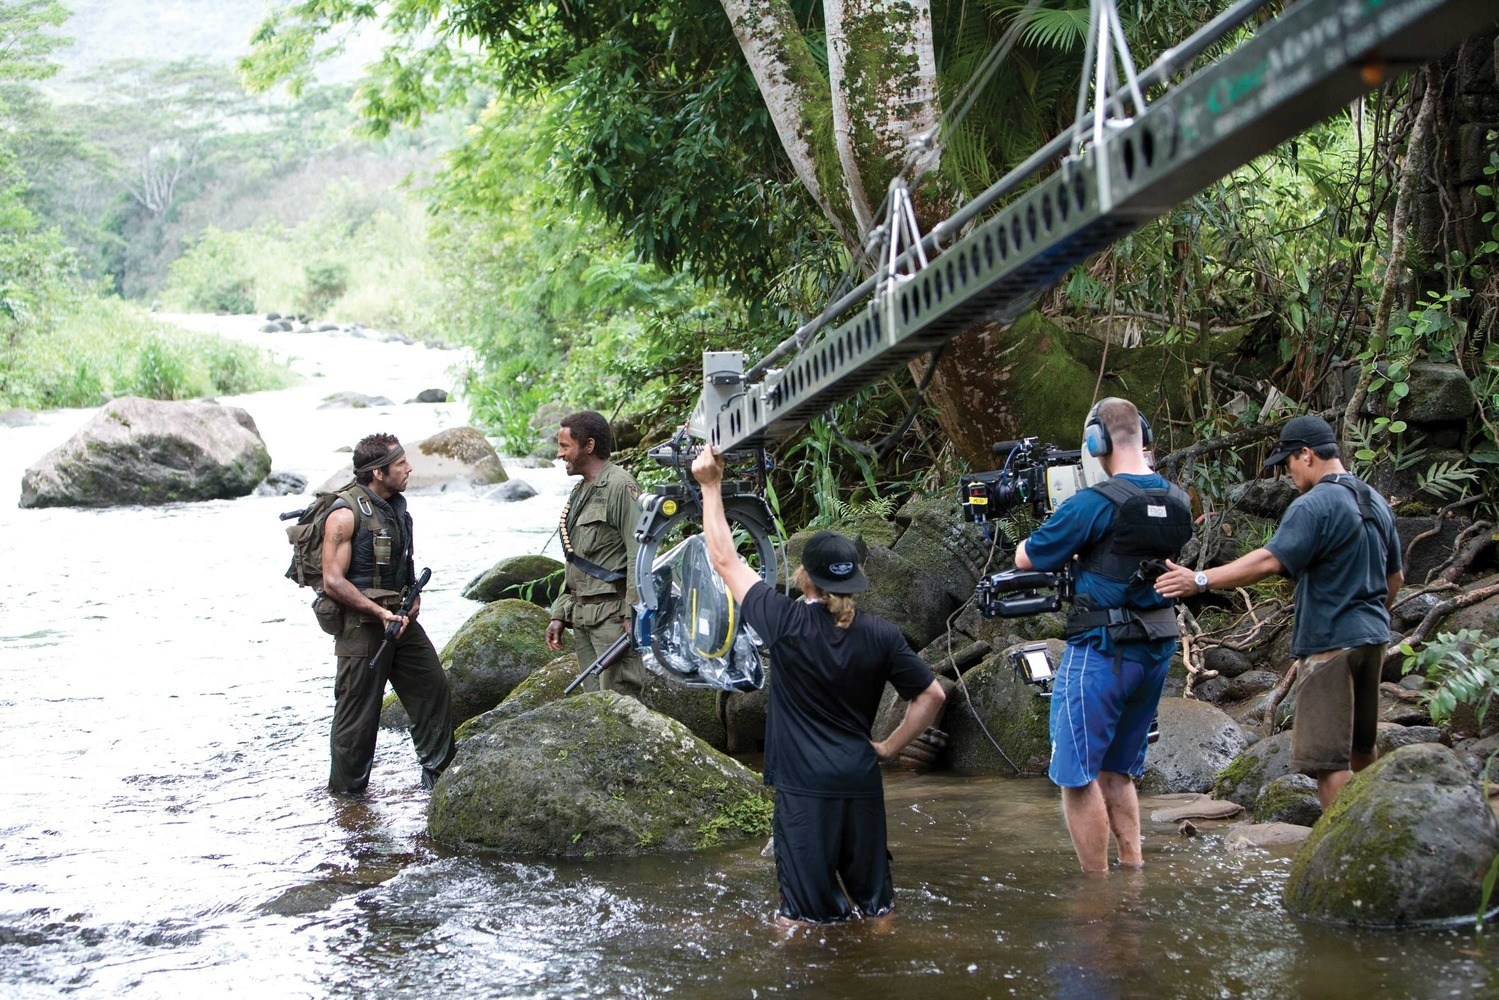 Filming Tropic Thunder (2008) Behind the Scenes